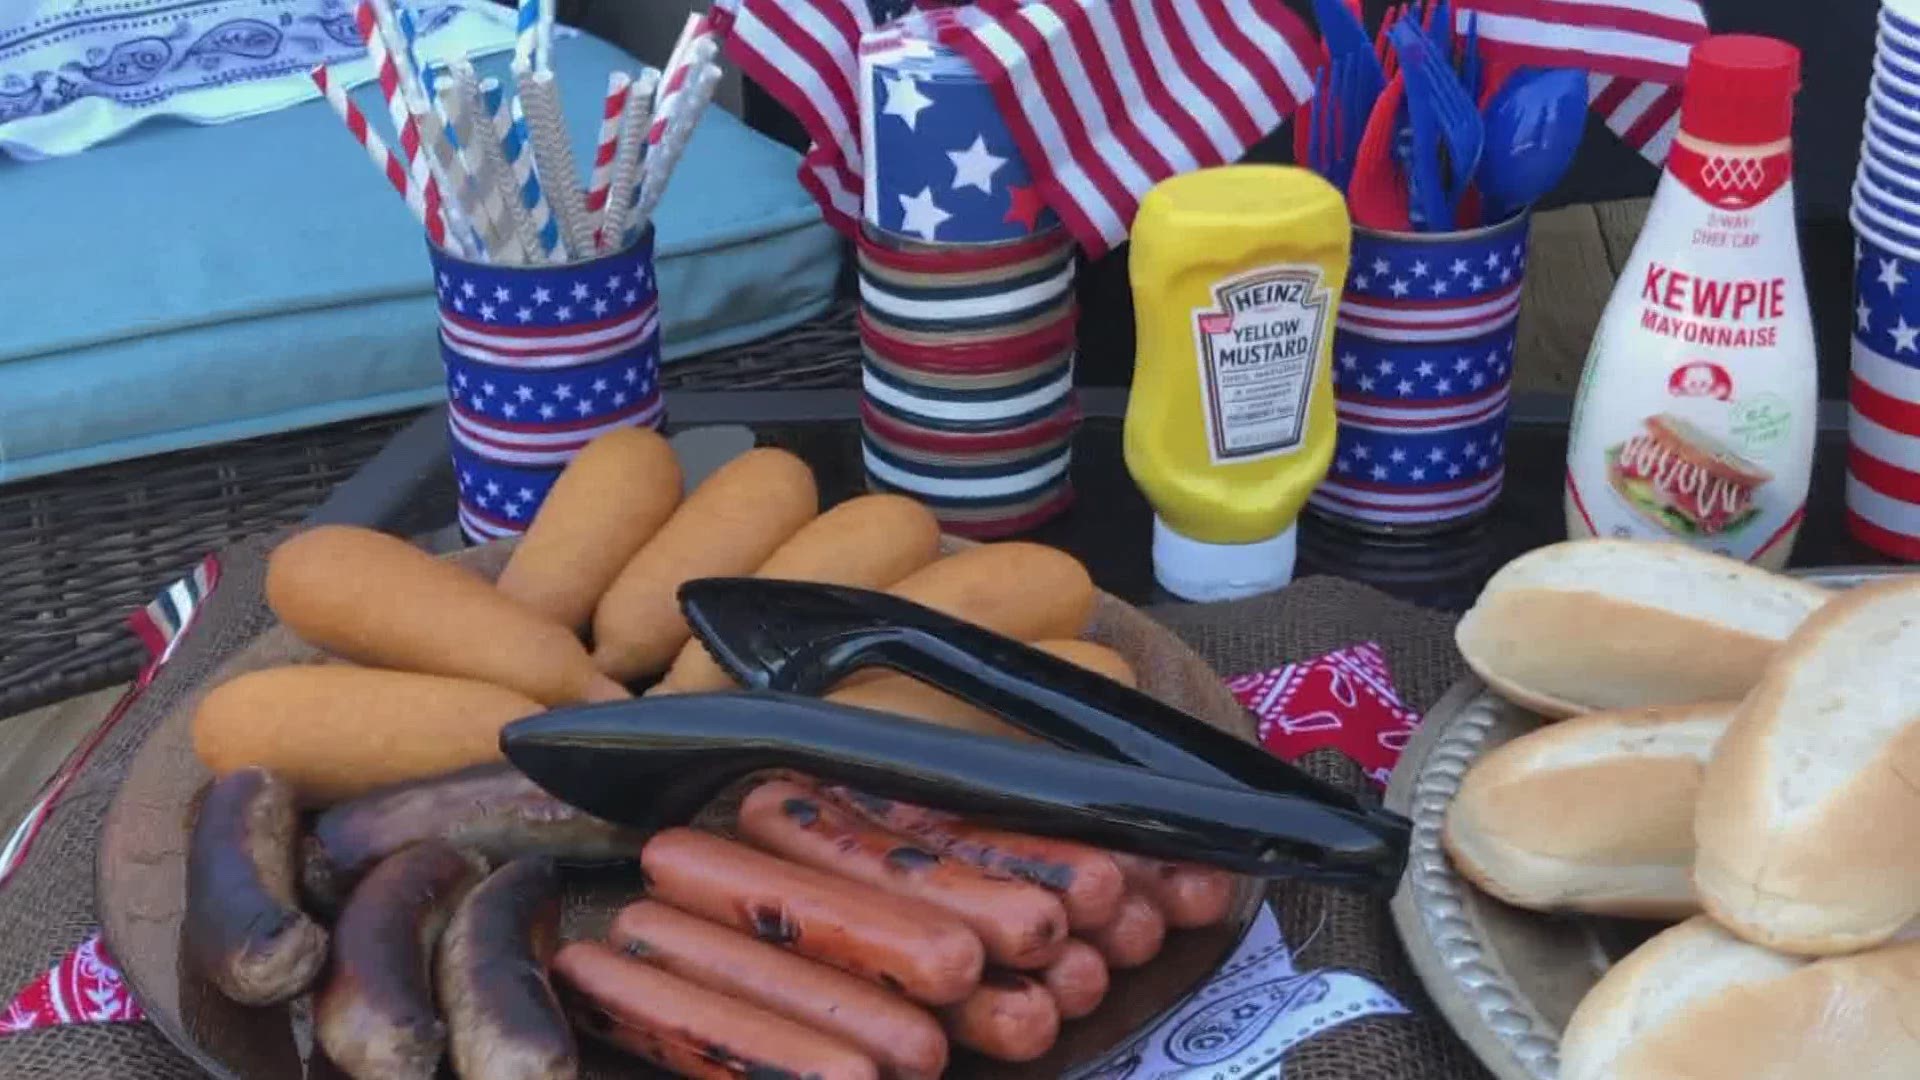 From bandana pillows to a hot dog bar, see ways to get creative this Memorial Day